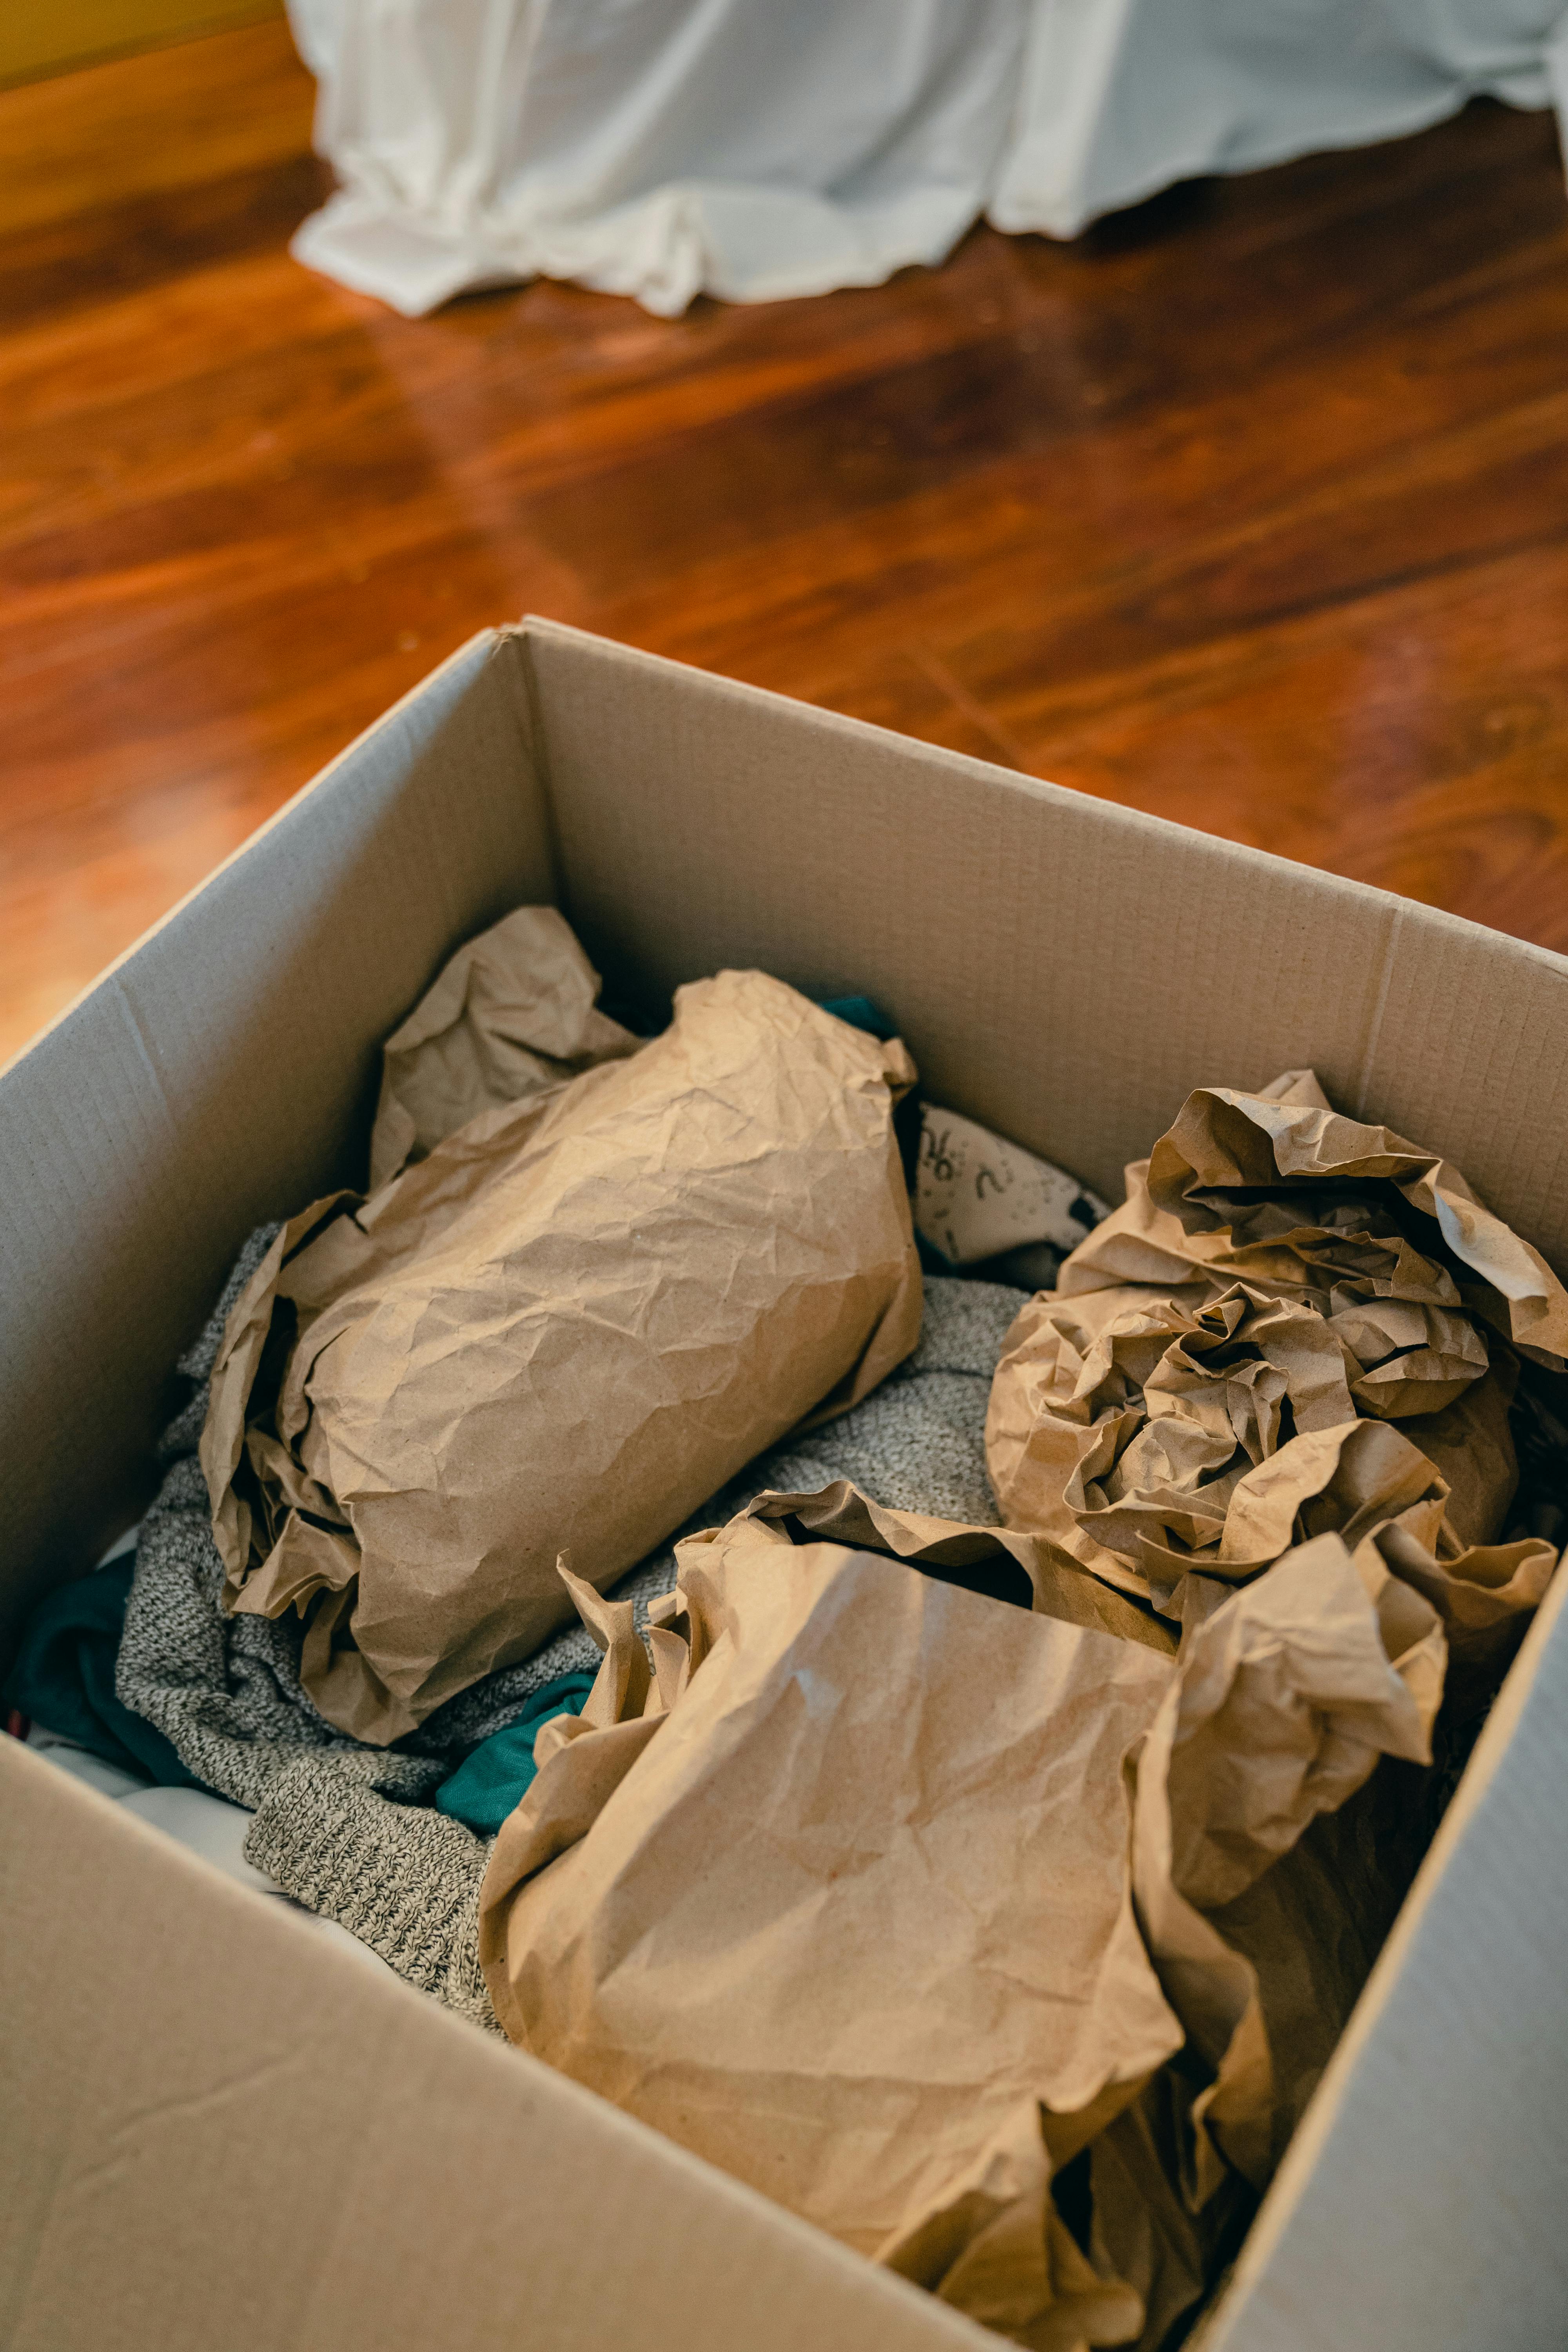 Box with clearly packed stuff | Source: Pexels